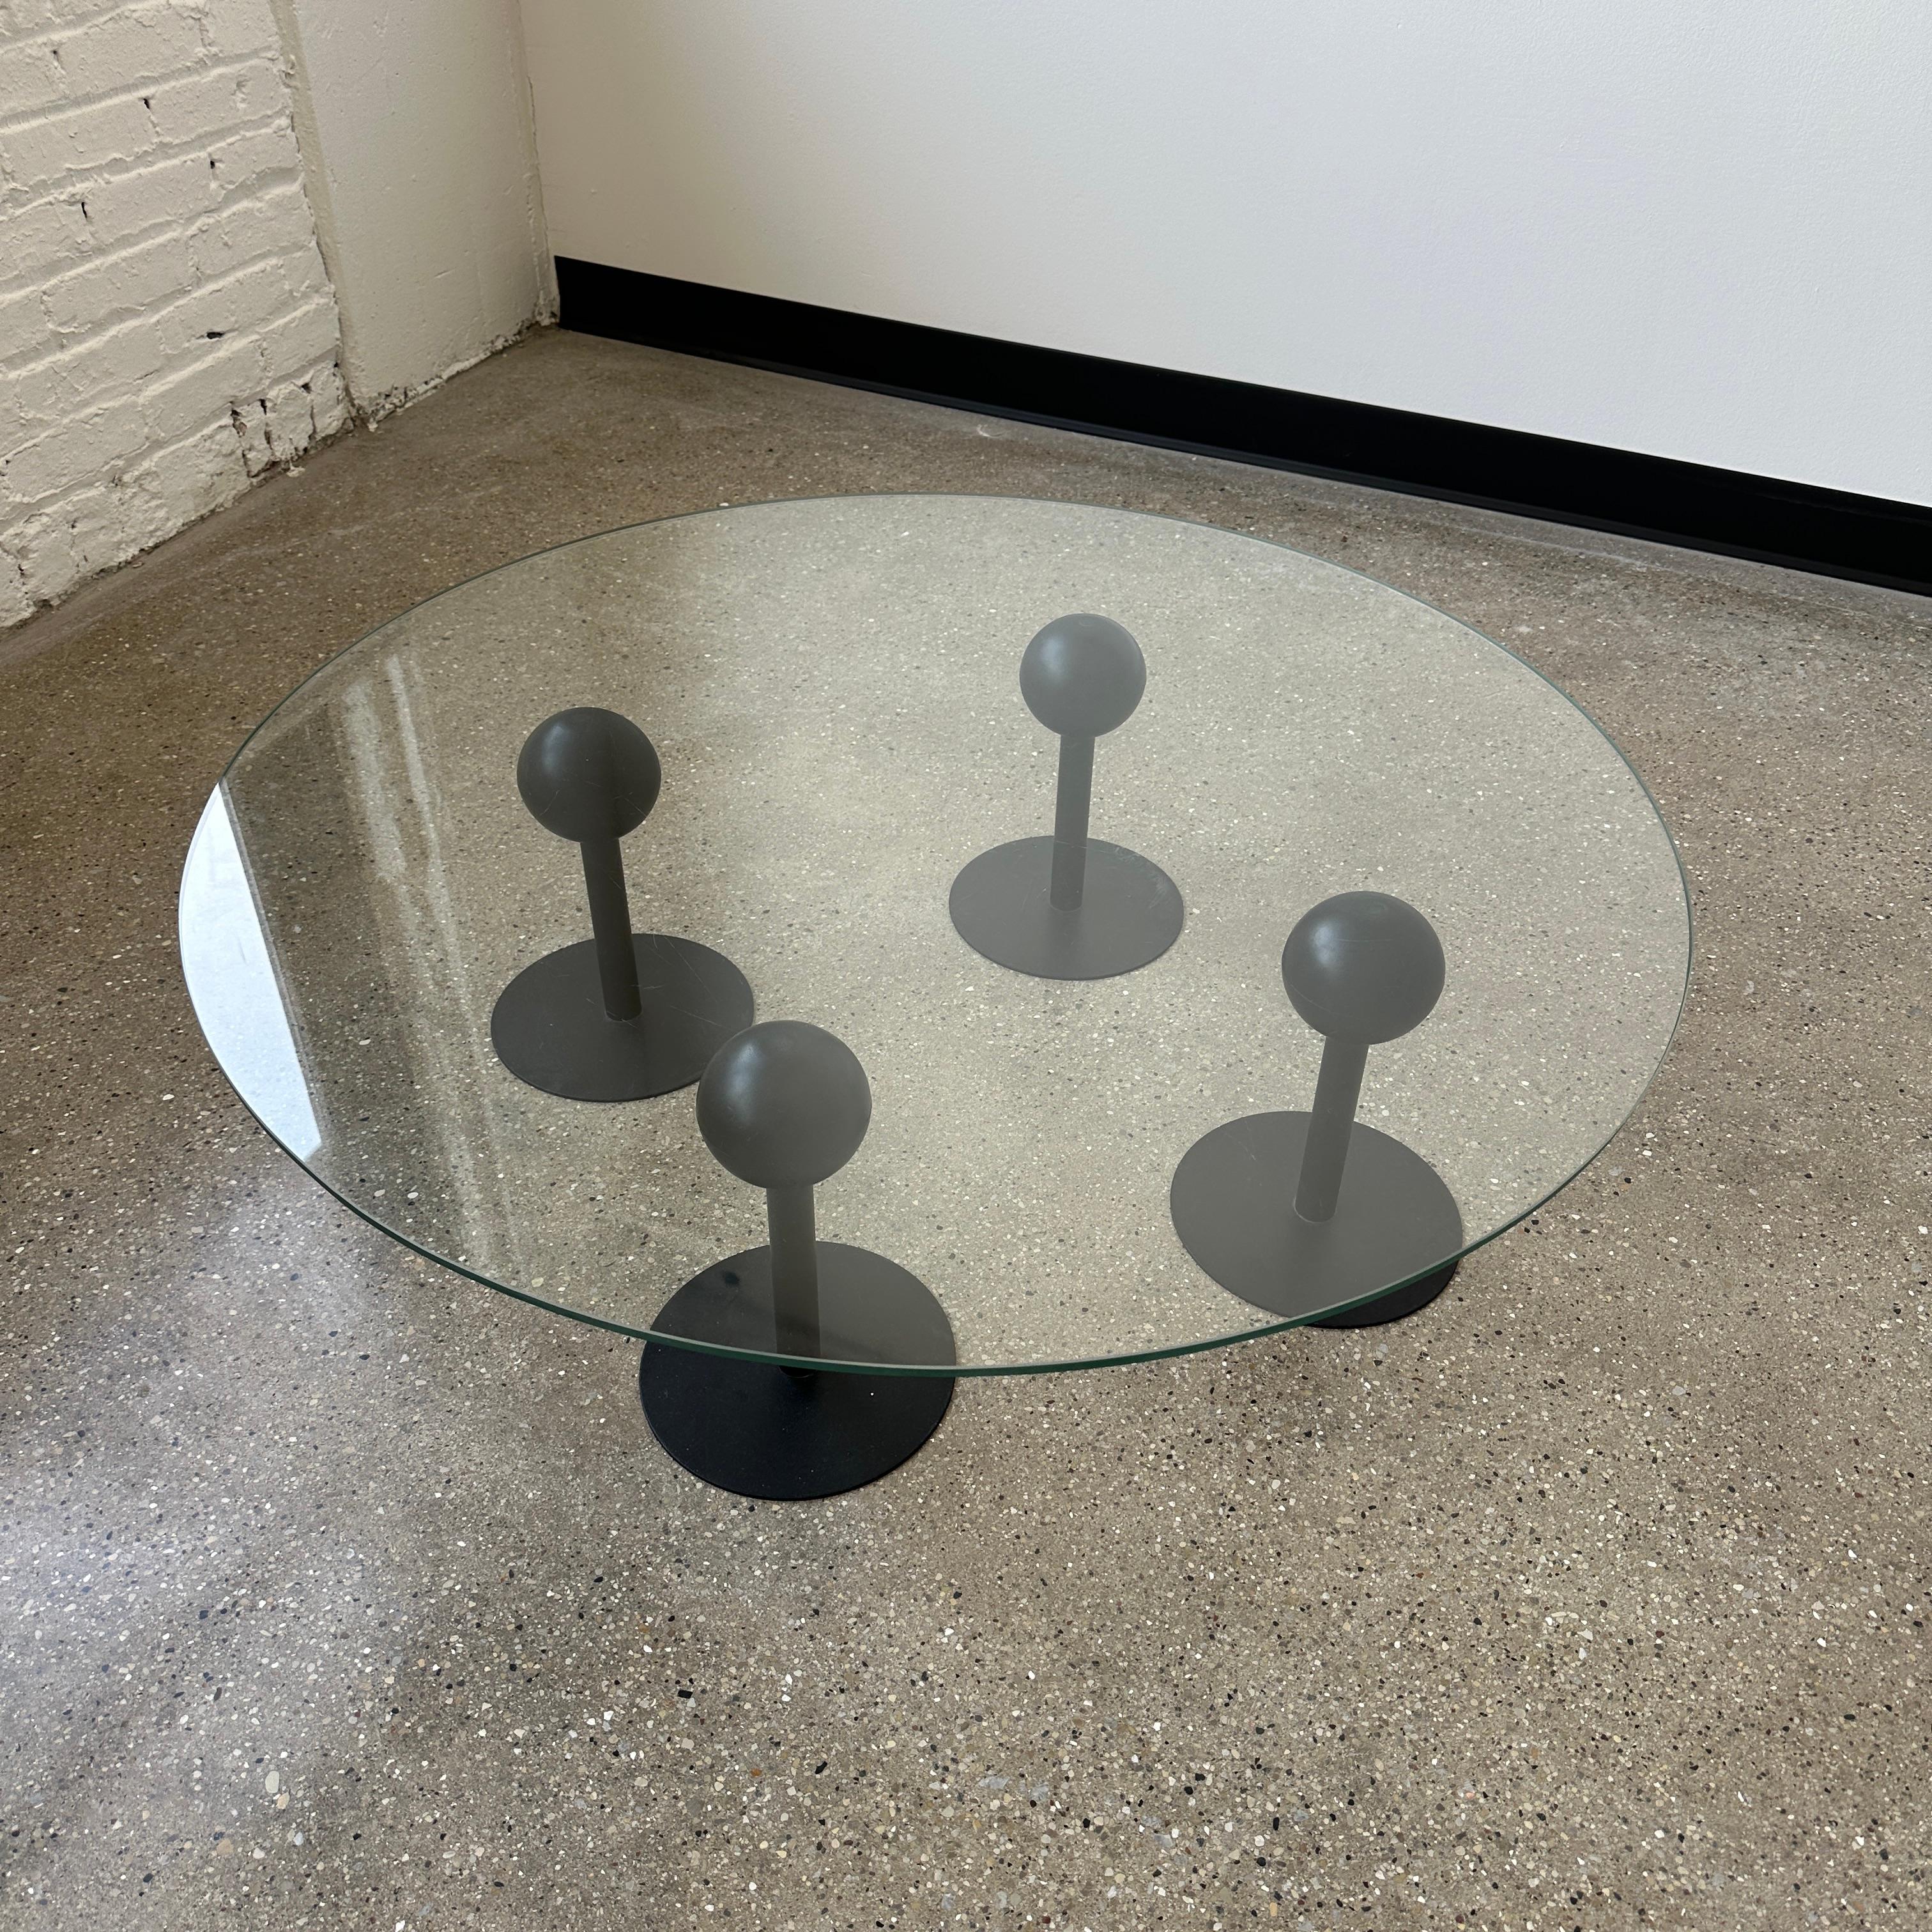 for Disform c. 1983, Spain. The four black supports feature rubber globes that gently cushion the glass - they can also be adjusted to fit any shape. This piece is in vintage condition with minimal wear. The glass has some scratches and scuffs but